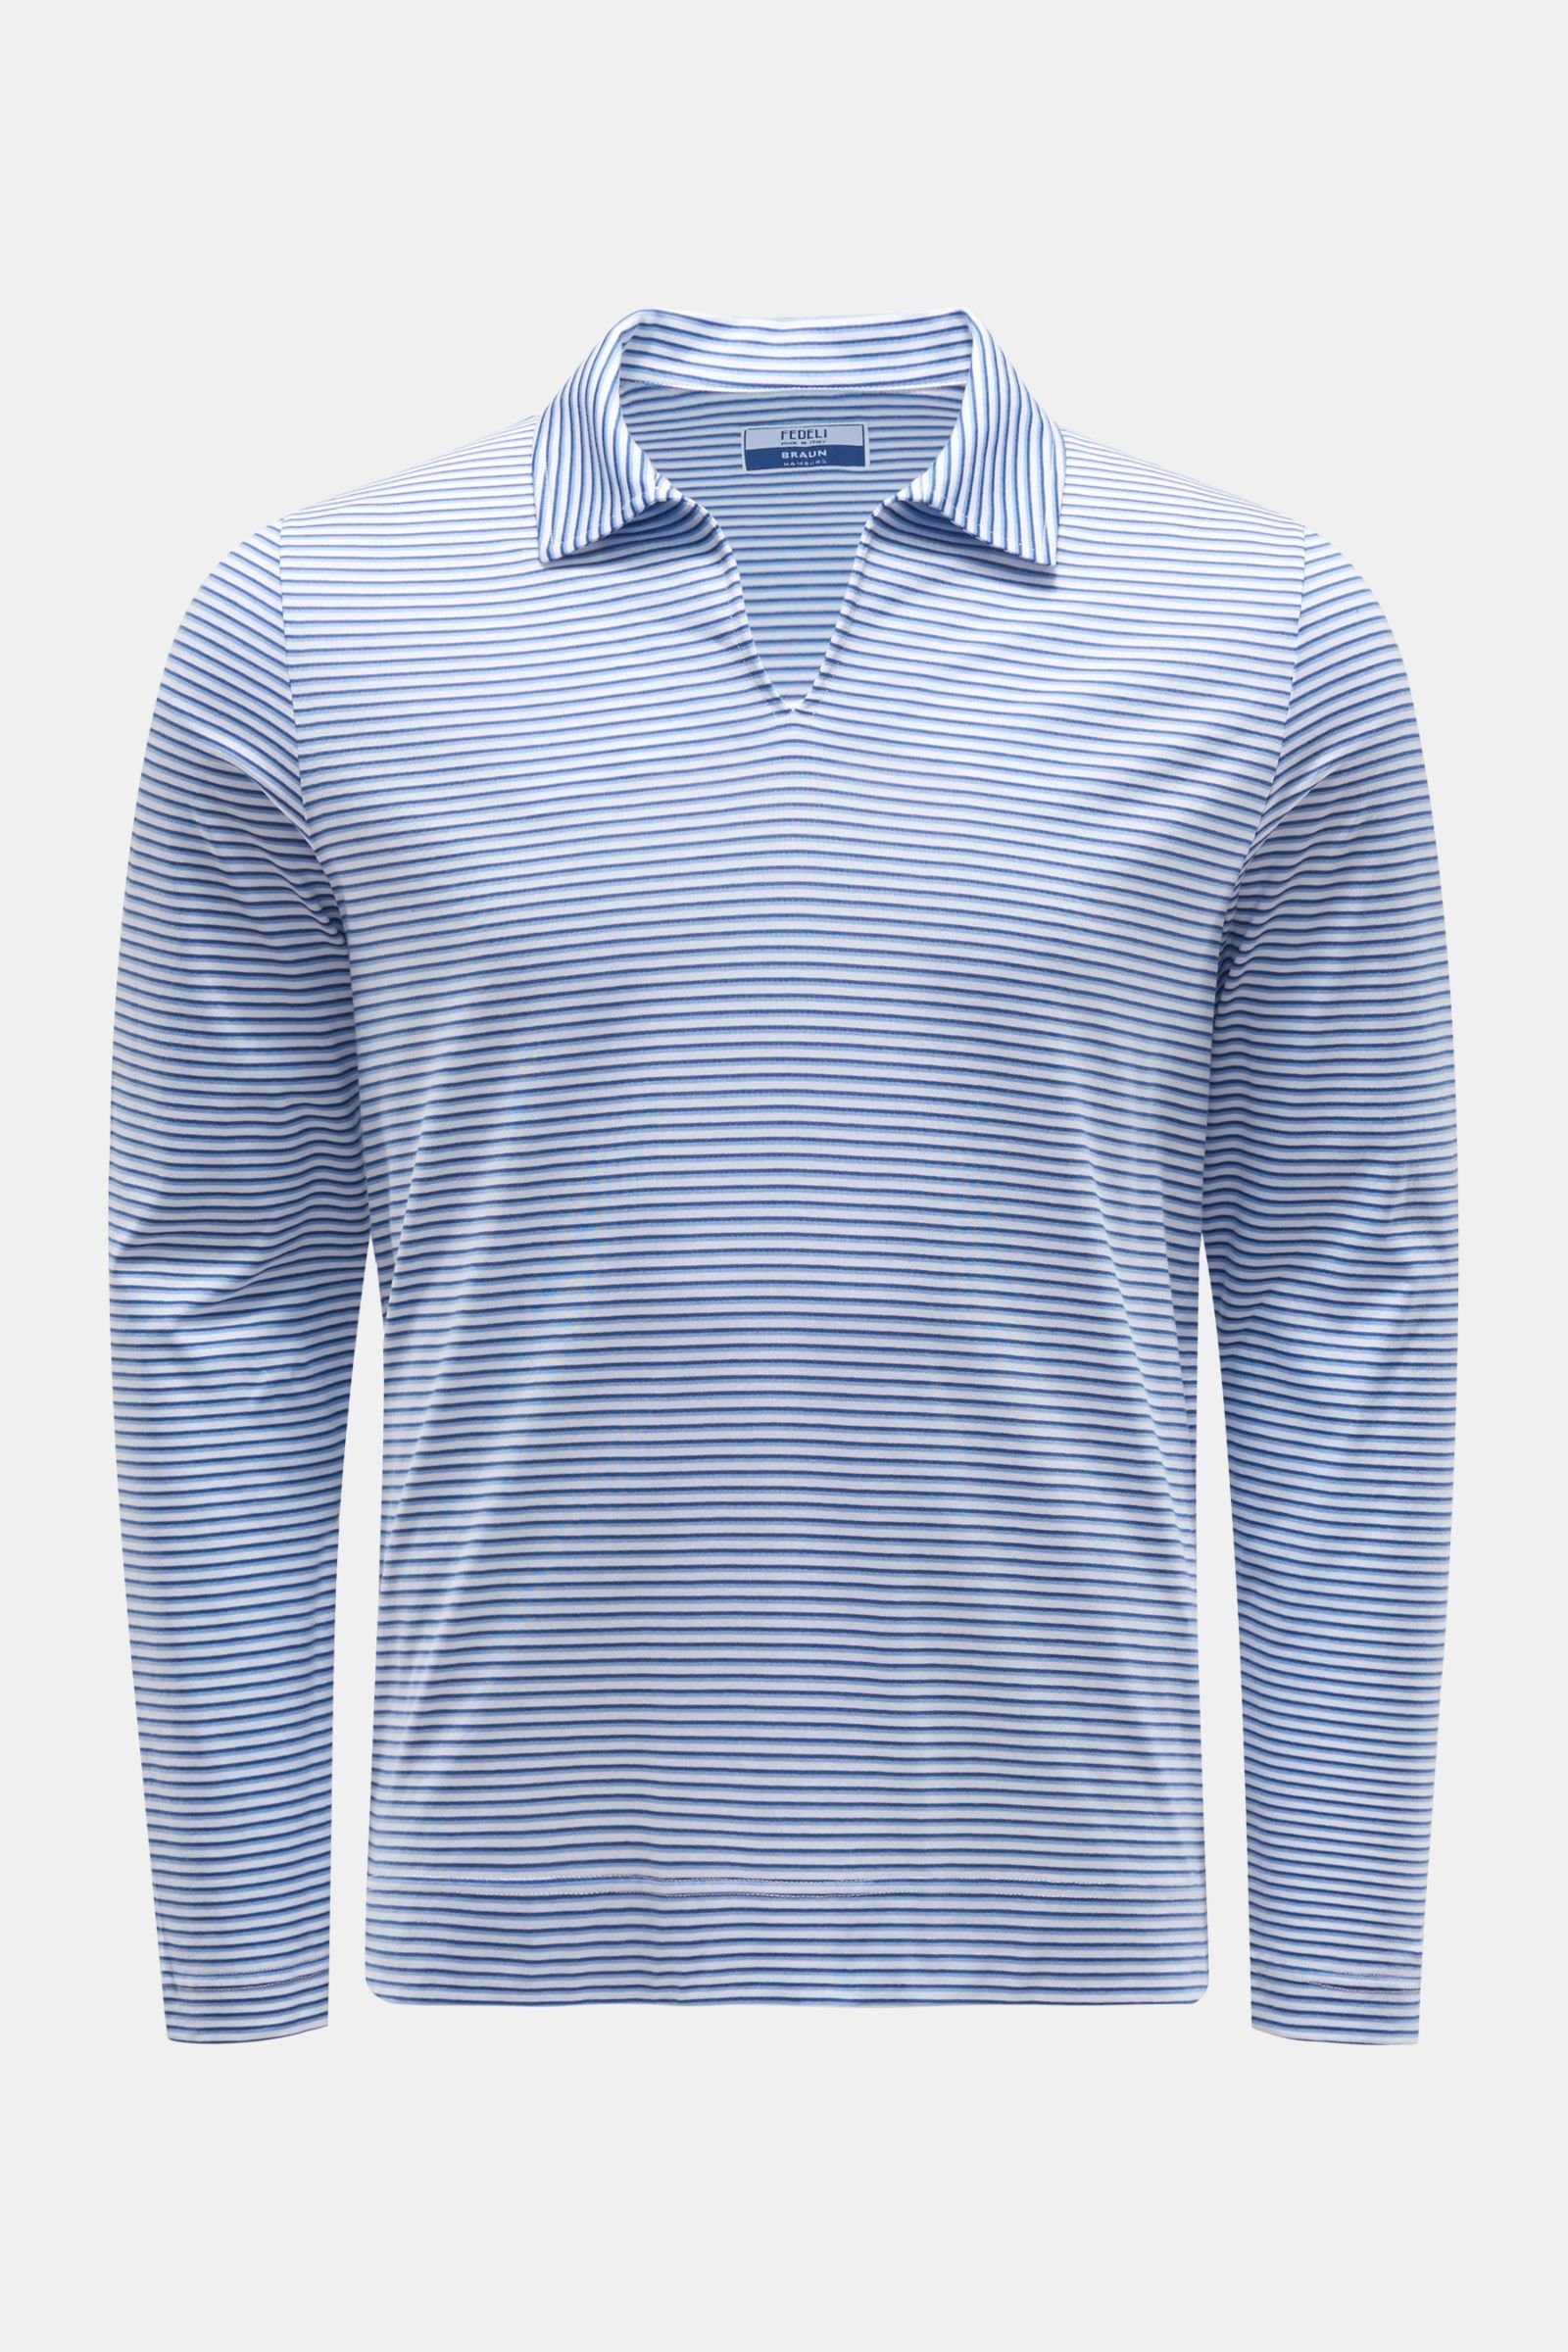 Long sleeve polo shirt 'Peter' navy/white striped